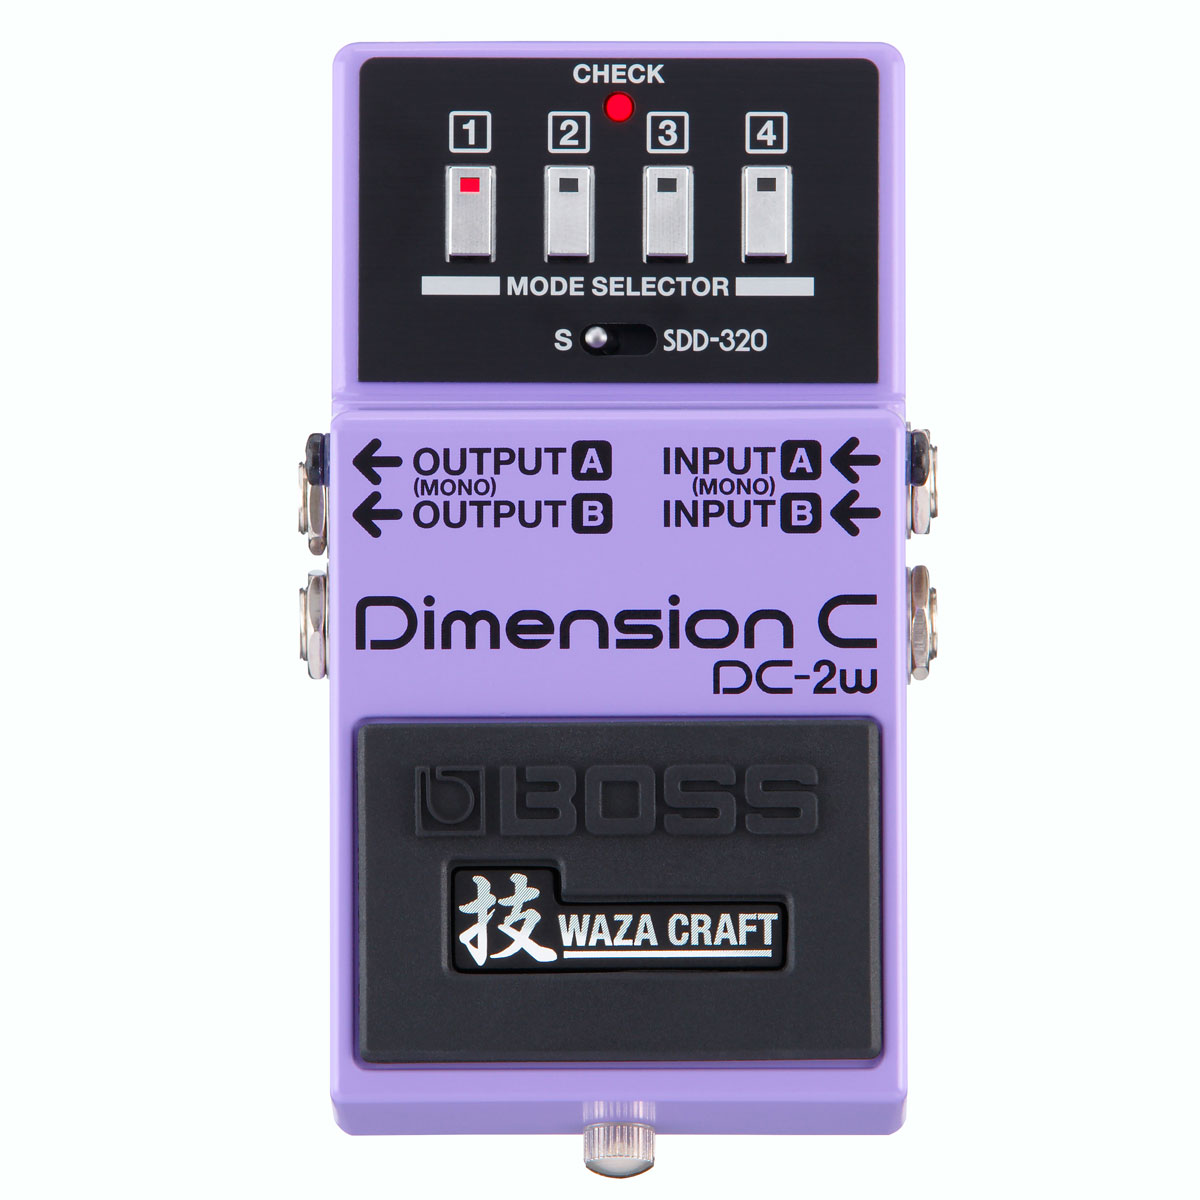 BOSS / DC-2W Dimension C MADE IN JAPAN 技 Waza Craft 日本製 ボス 